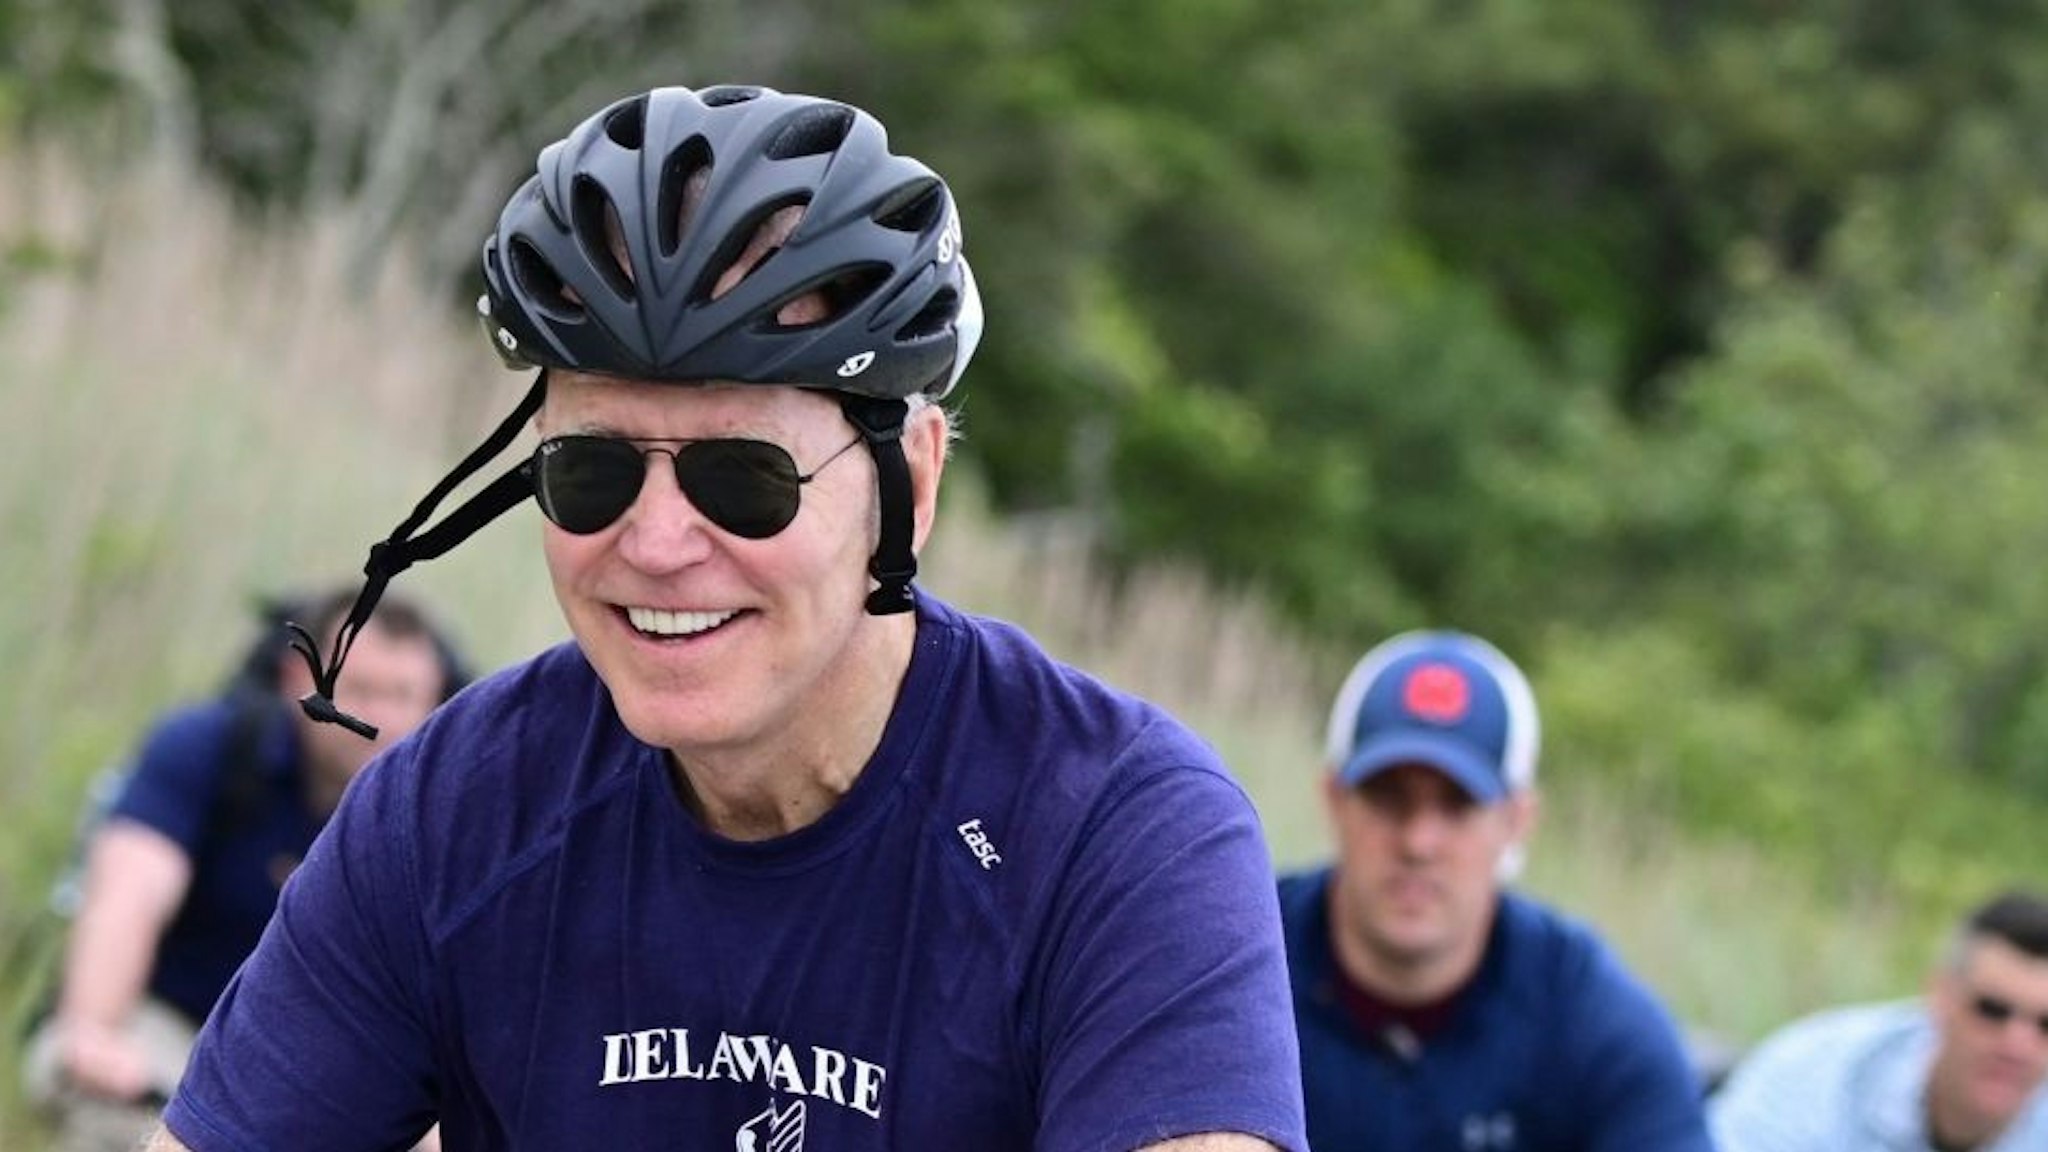 TOPSHOT - US President Joe Biden rides his bicycle in Cape Henlopen State Park on June 3, 2021, in Lewes, Delaware. (Photo by JIM WATSON / AFP) (Photo by